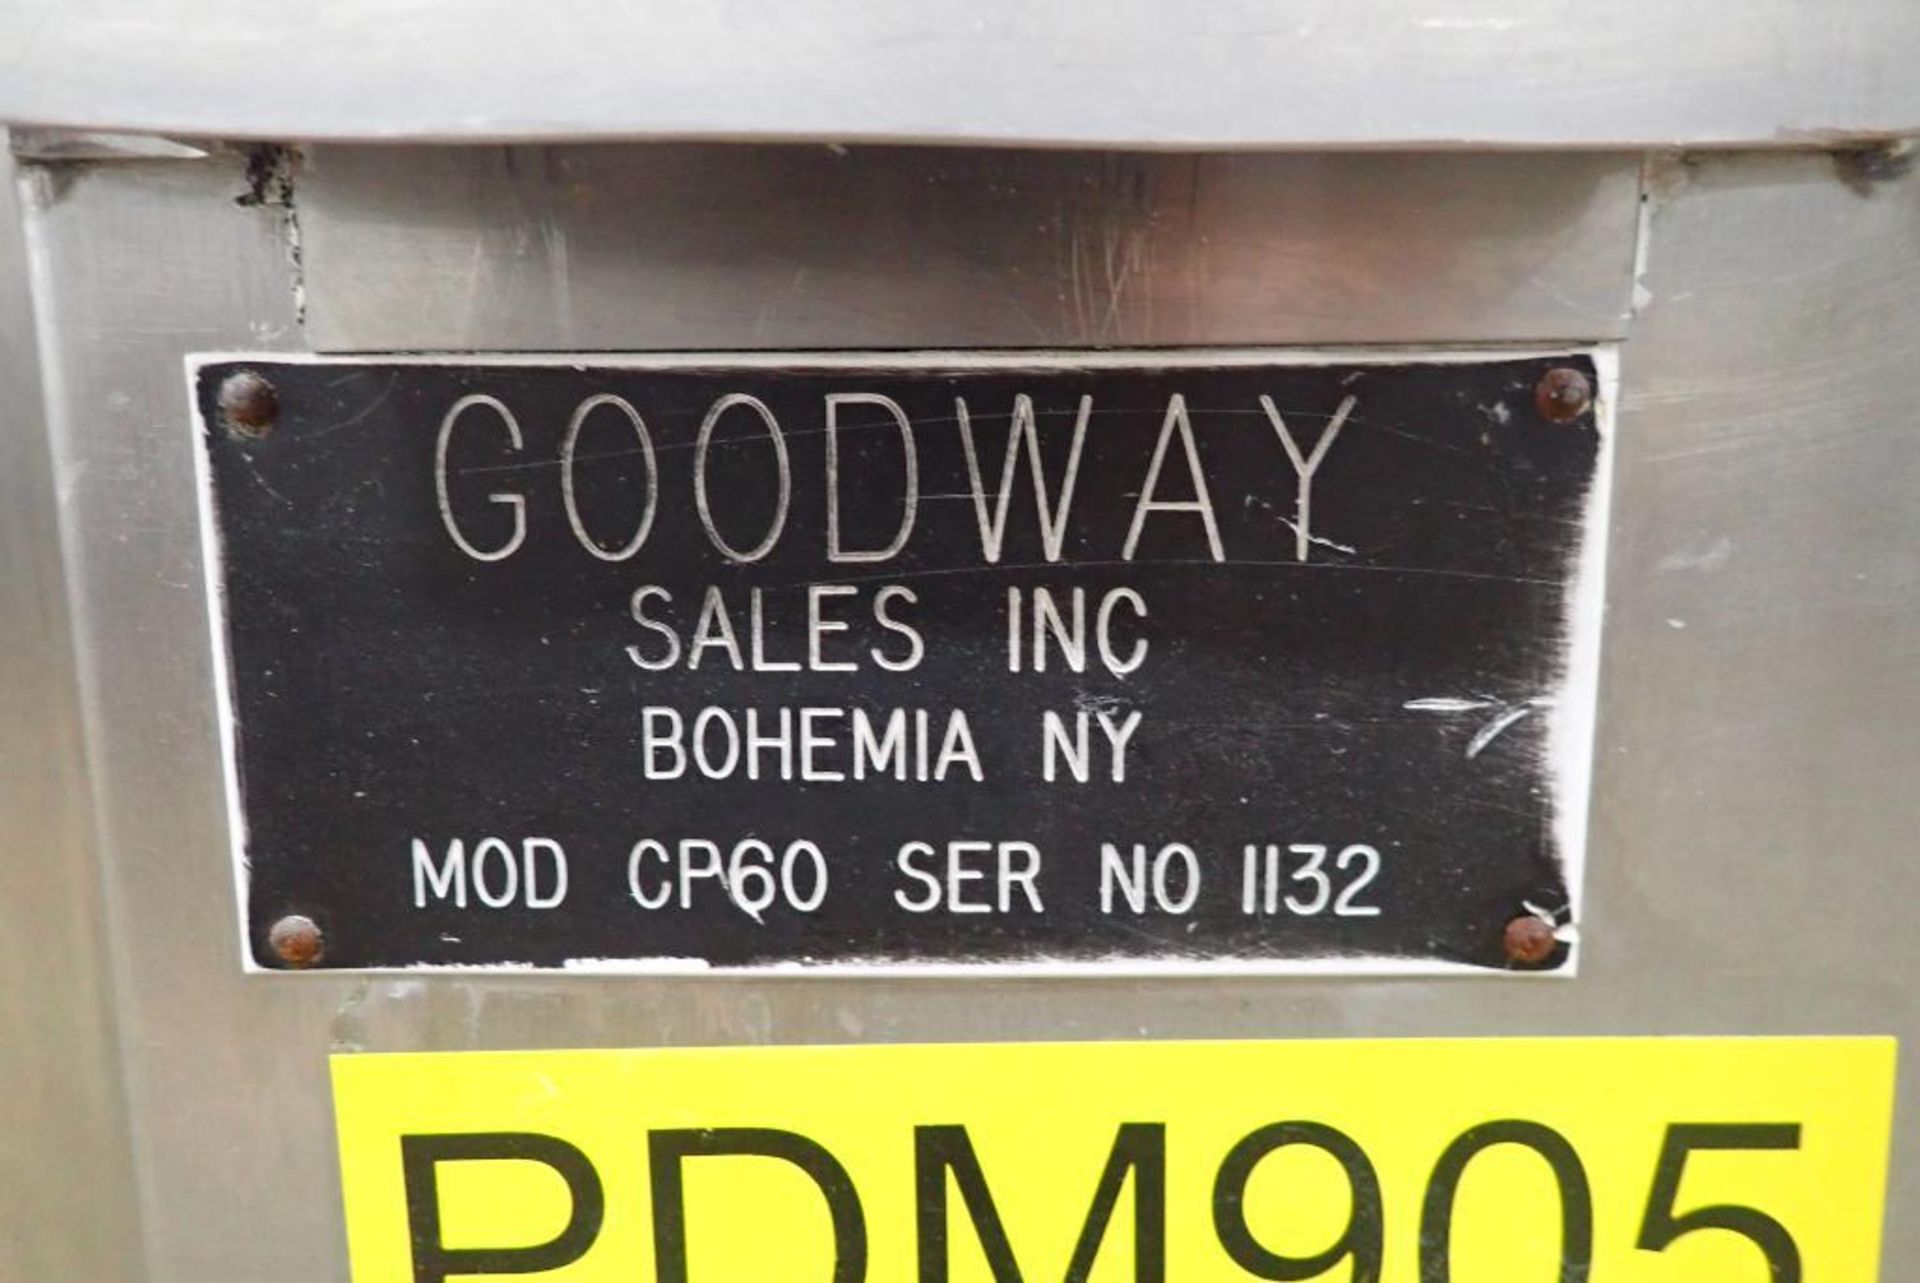 Goodway de-duster - Image 19 of 20